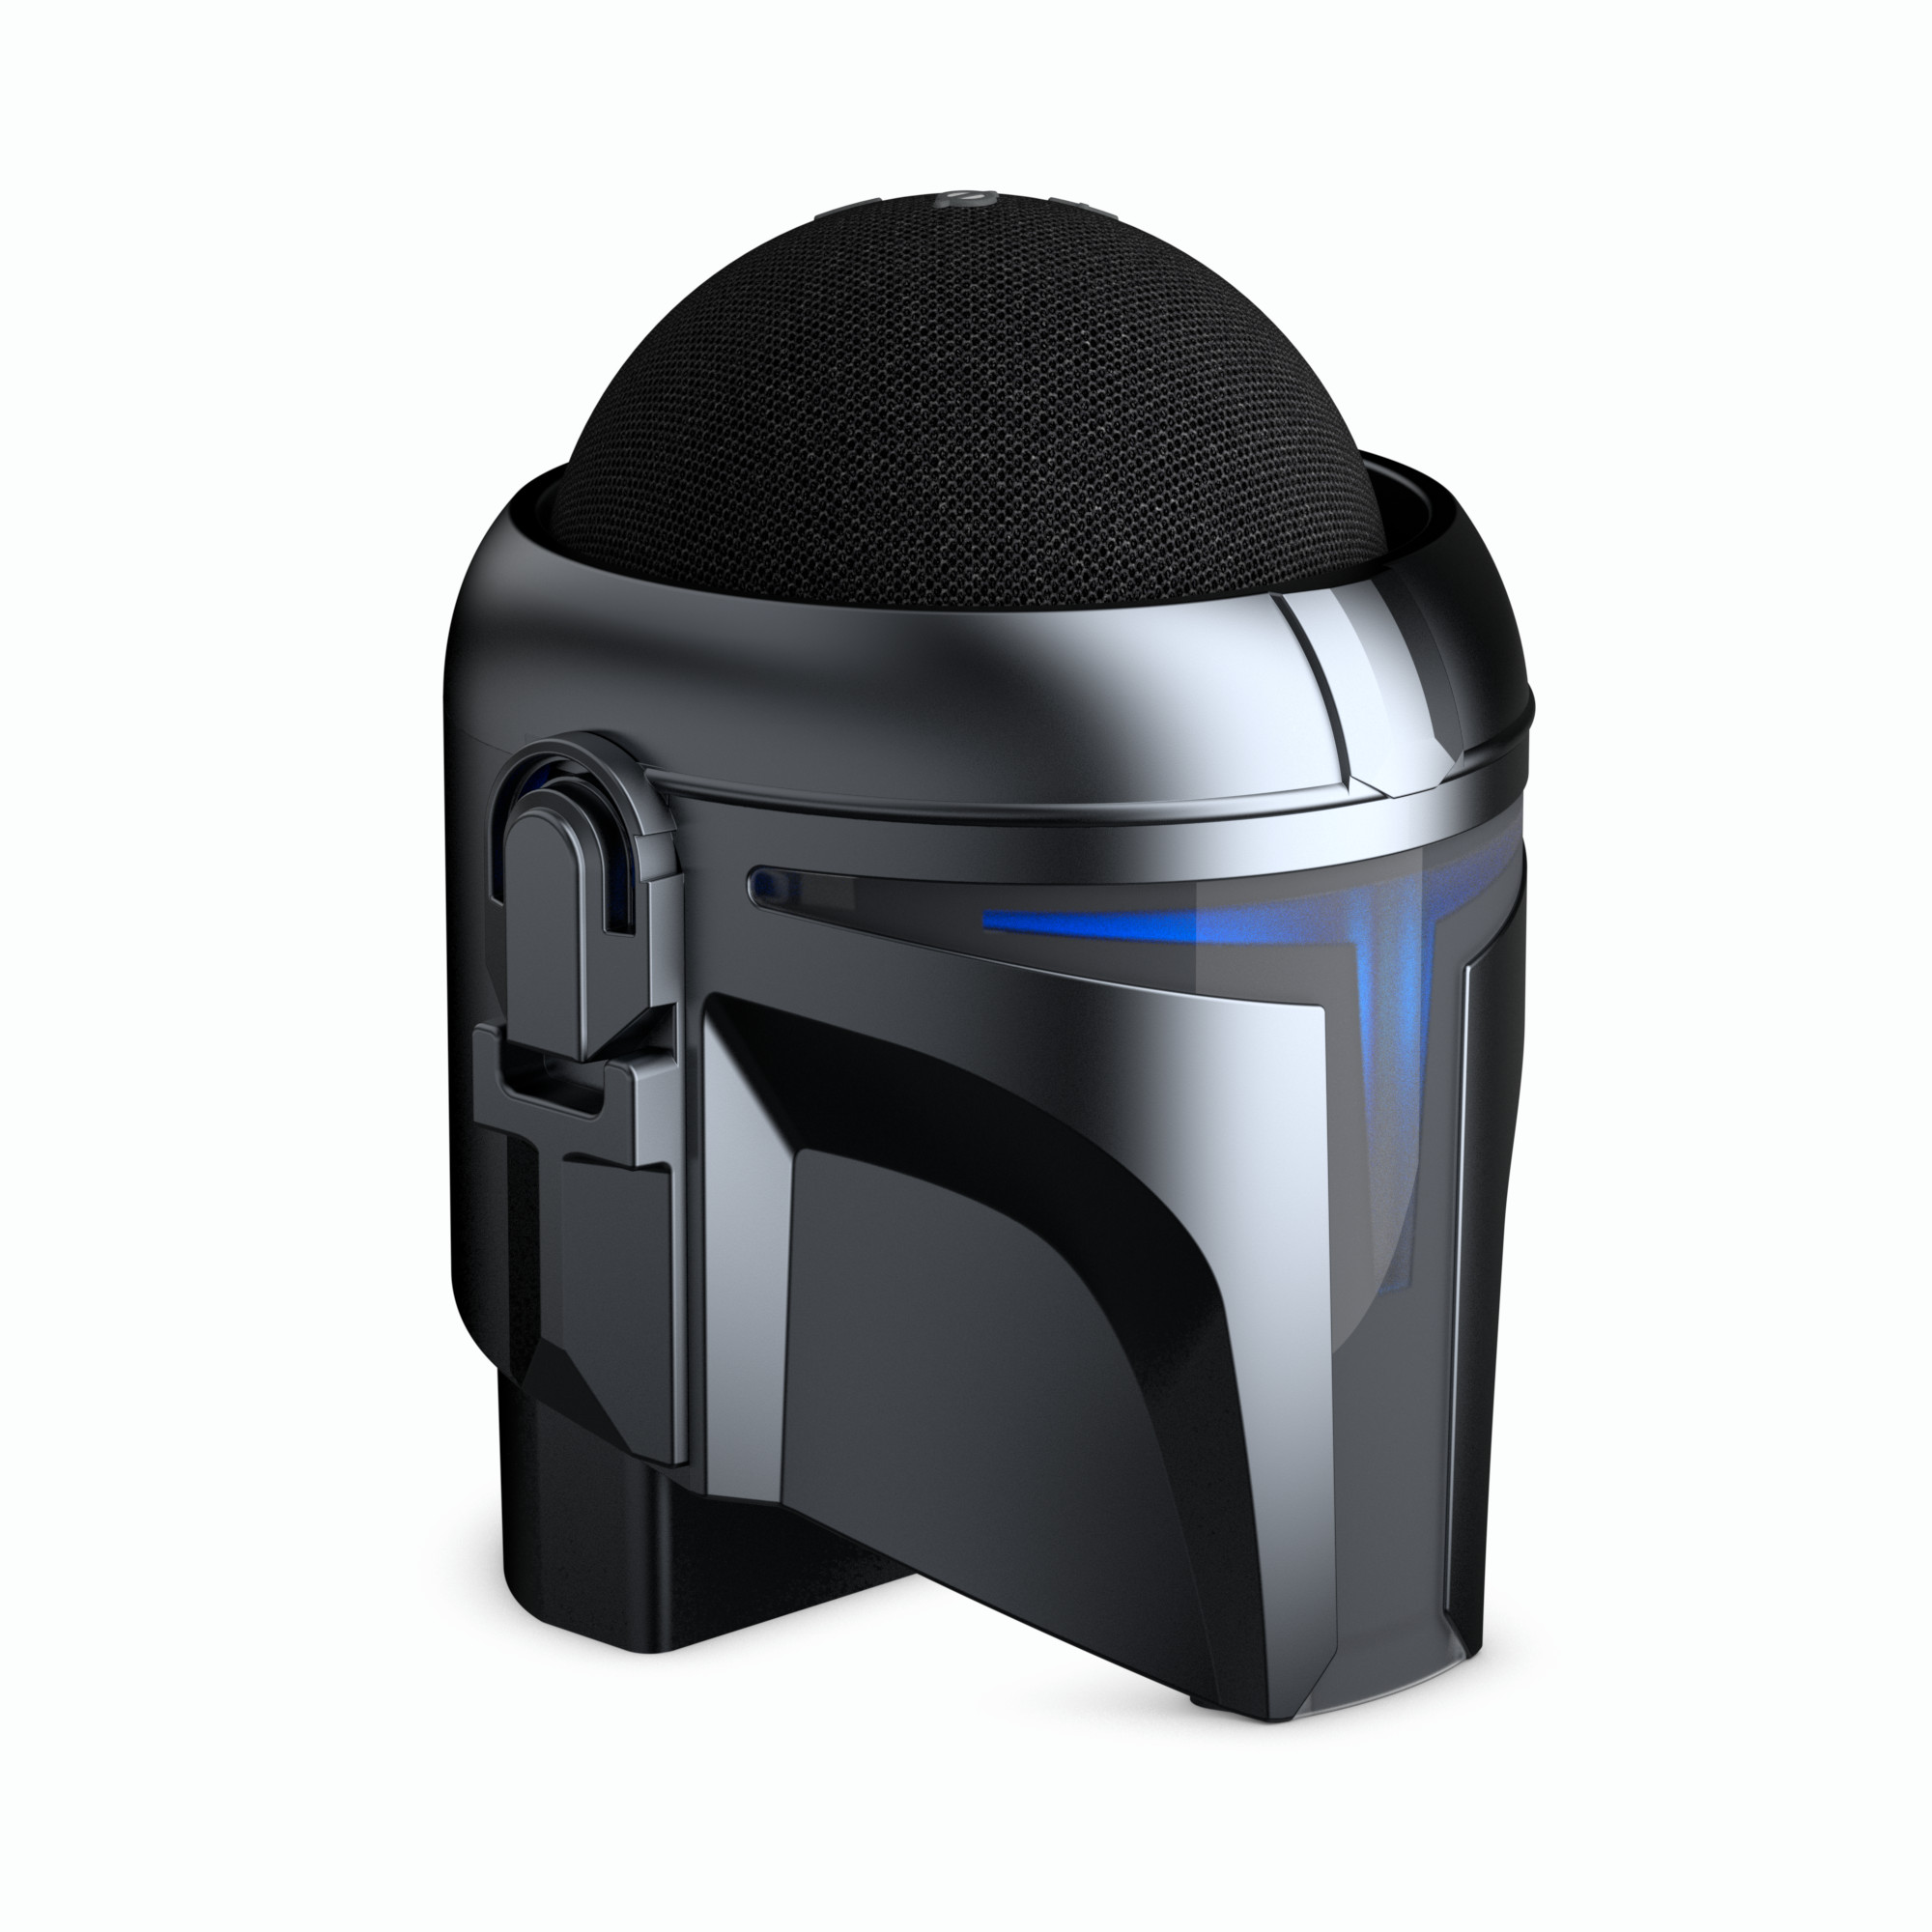 Product render of Mando Helmet with Echo Dot. Lighting, compositing, and material creation were made in Cinema4D